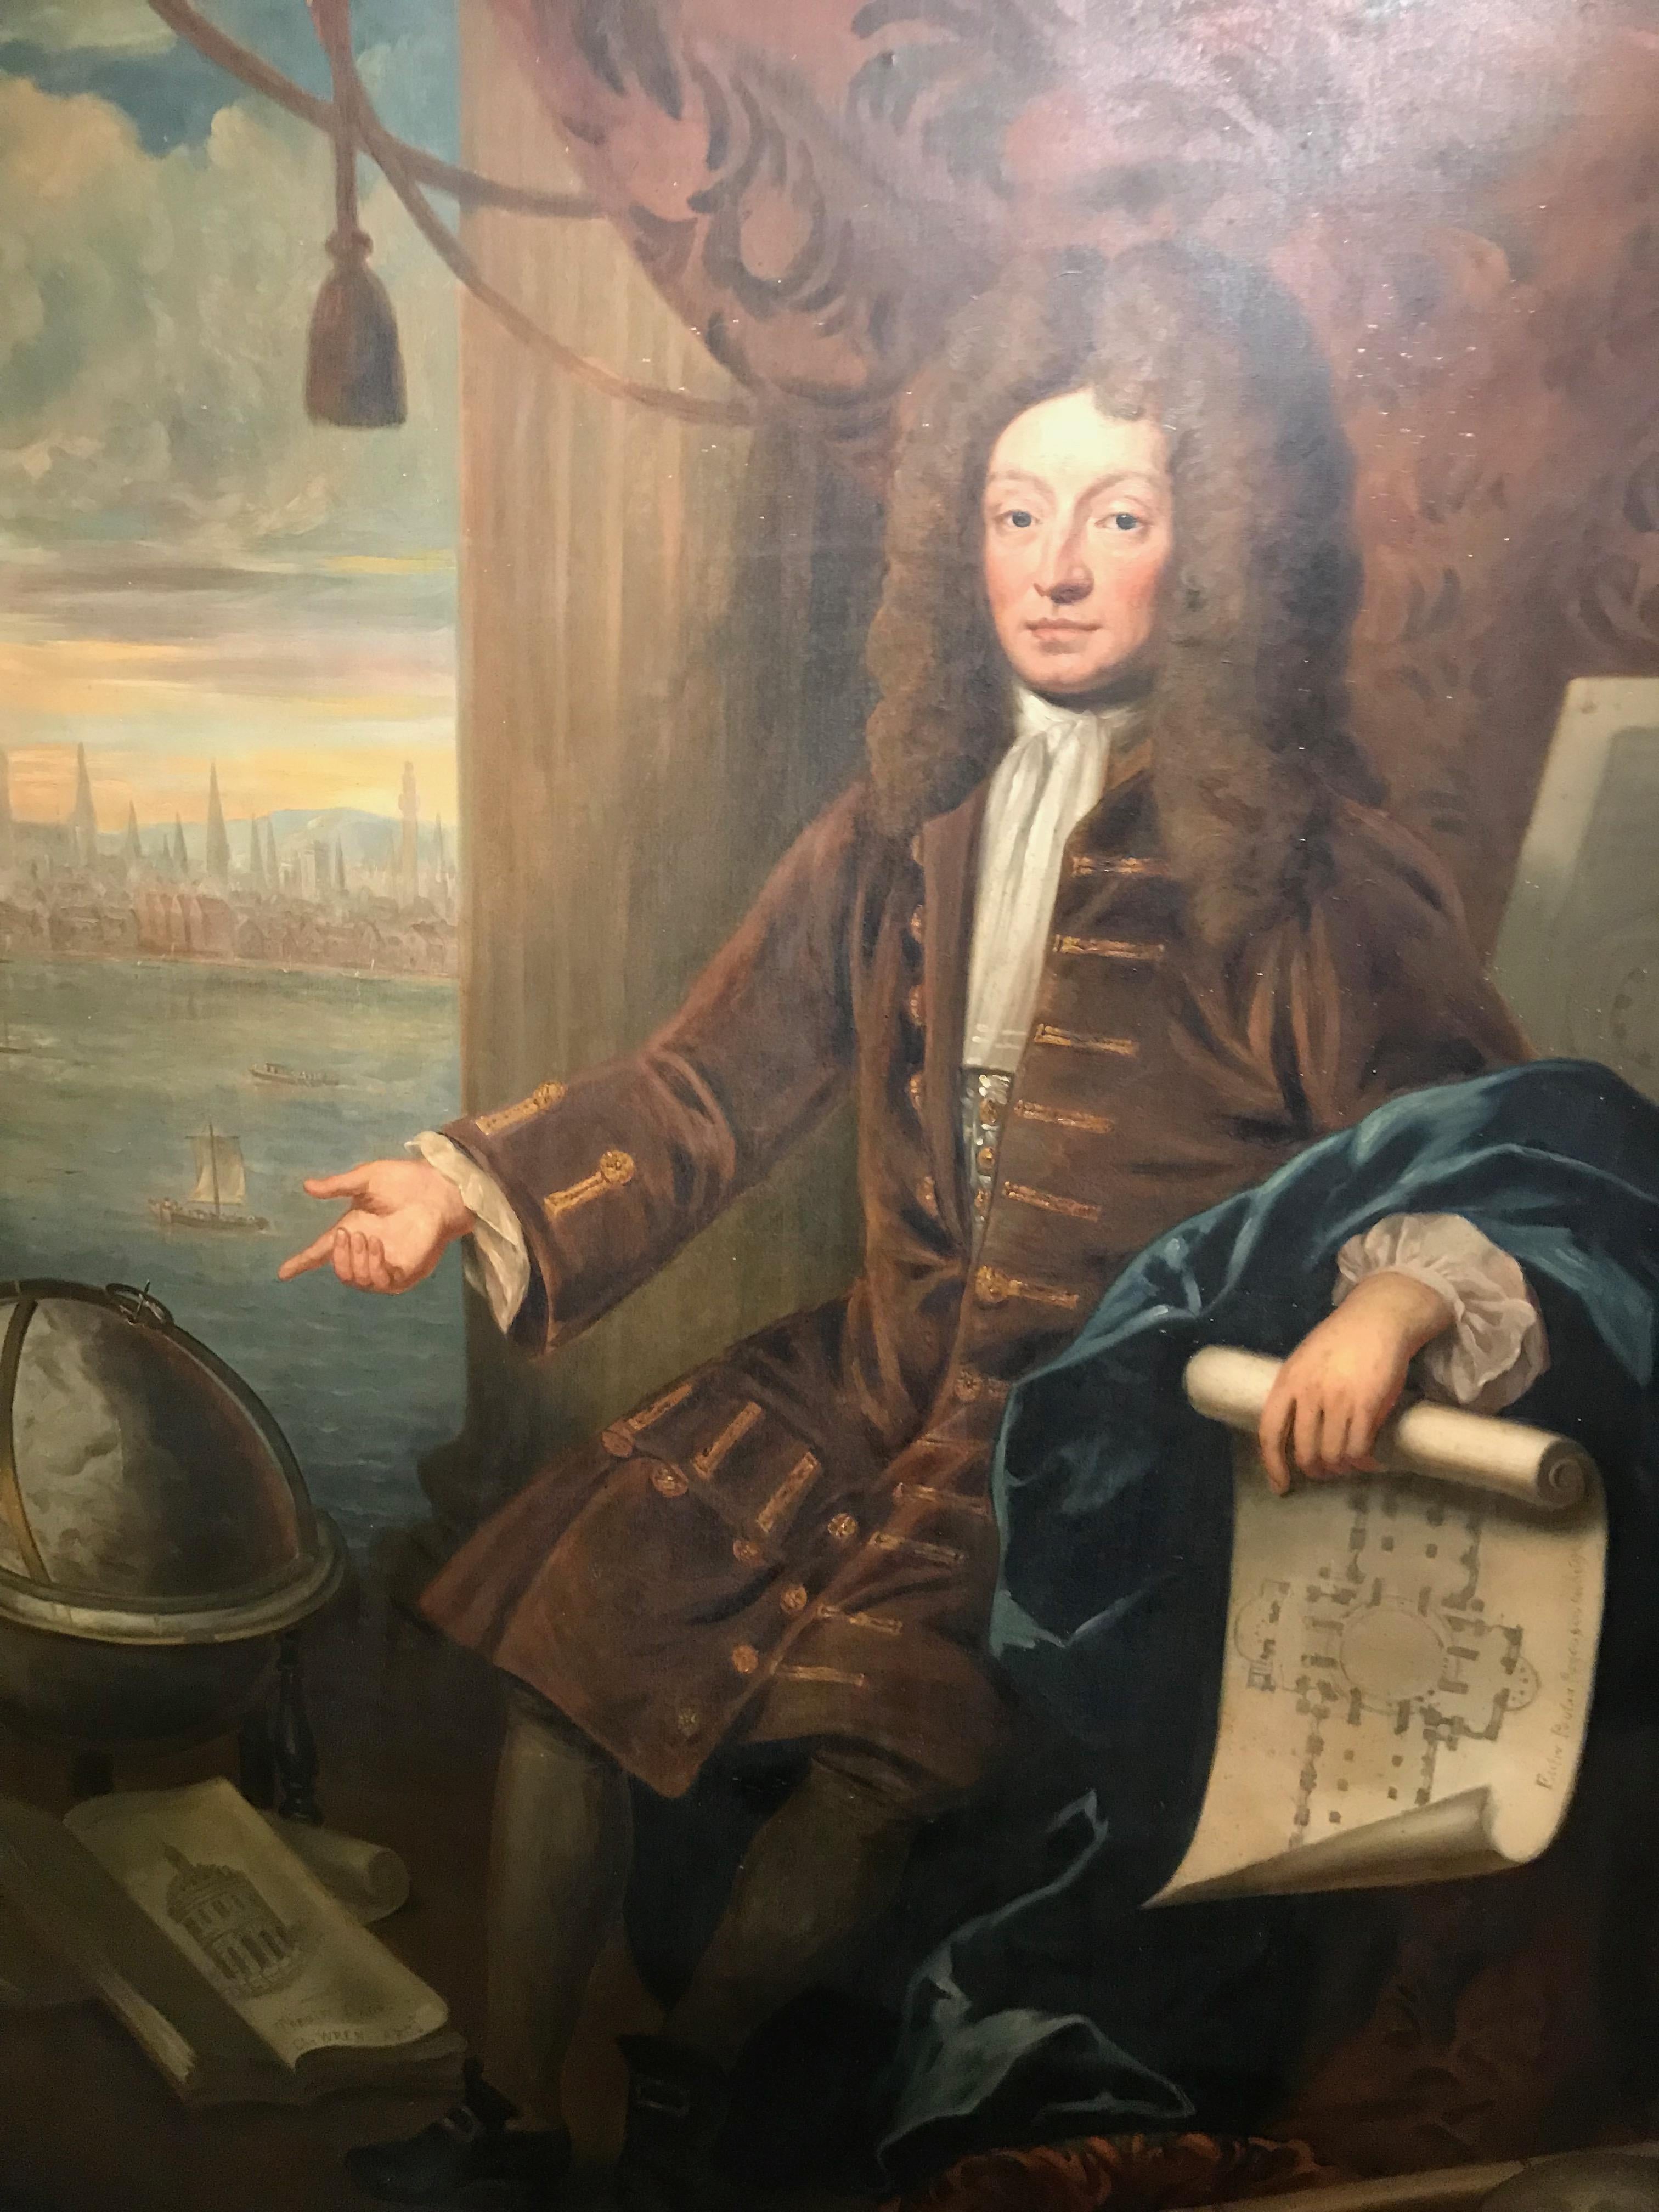 A very large 8.5 foot tall 17th Century full length portrait oil painting of Sir Christopher Wren attributed to the renowned English portrait artist Sir Peter Lely  This remarkable full length portrait depicts the famed architect Sir Christopher